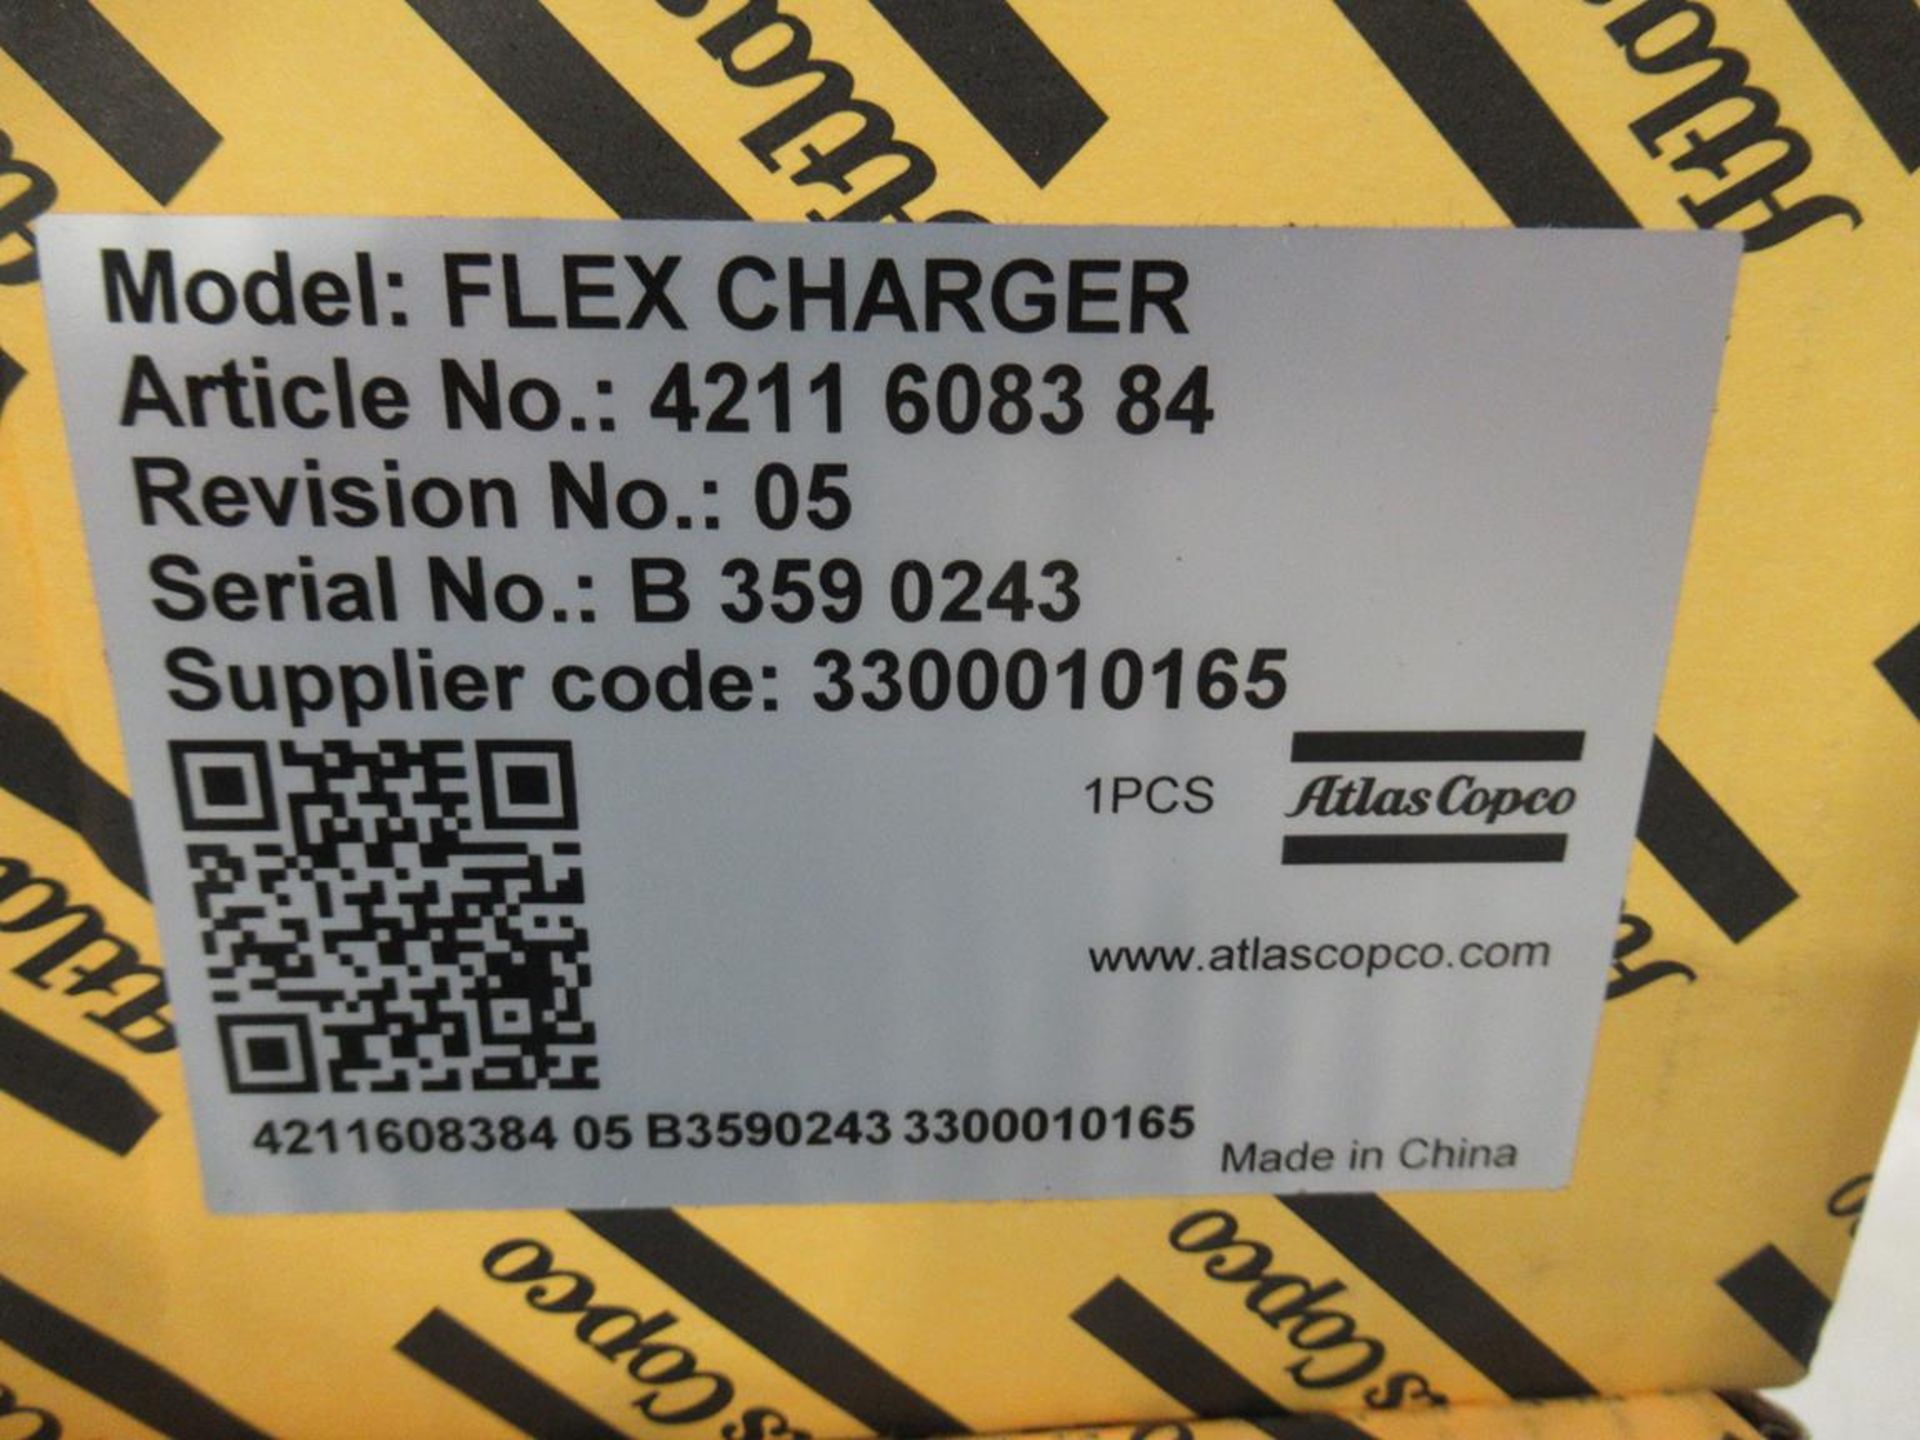 4x (no.) Atlas Copco, flex charger, Article No. 4211 6083 84 (boxed and unused) - Image 4 of 4